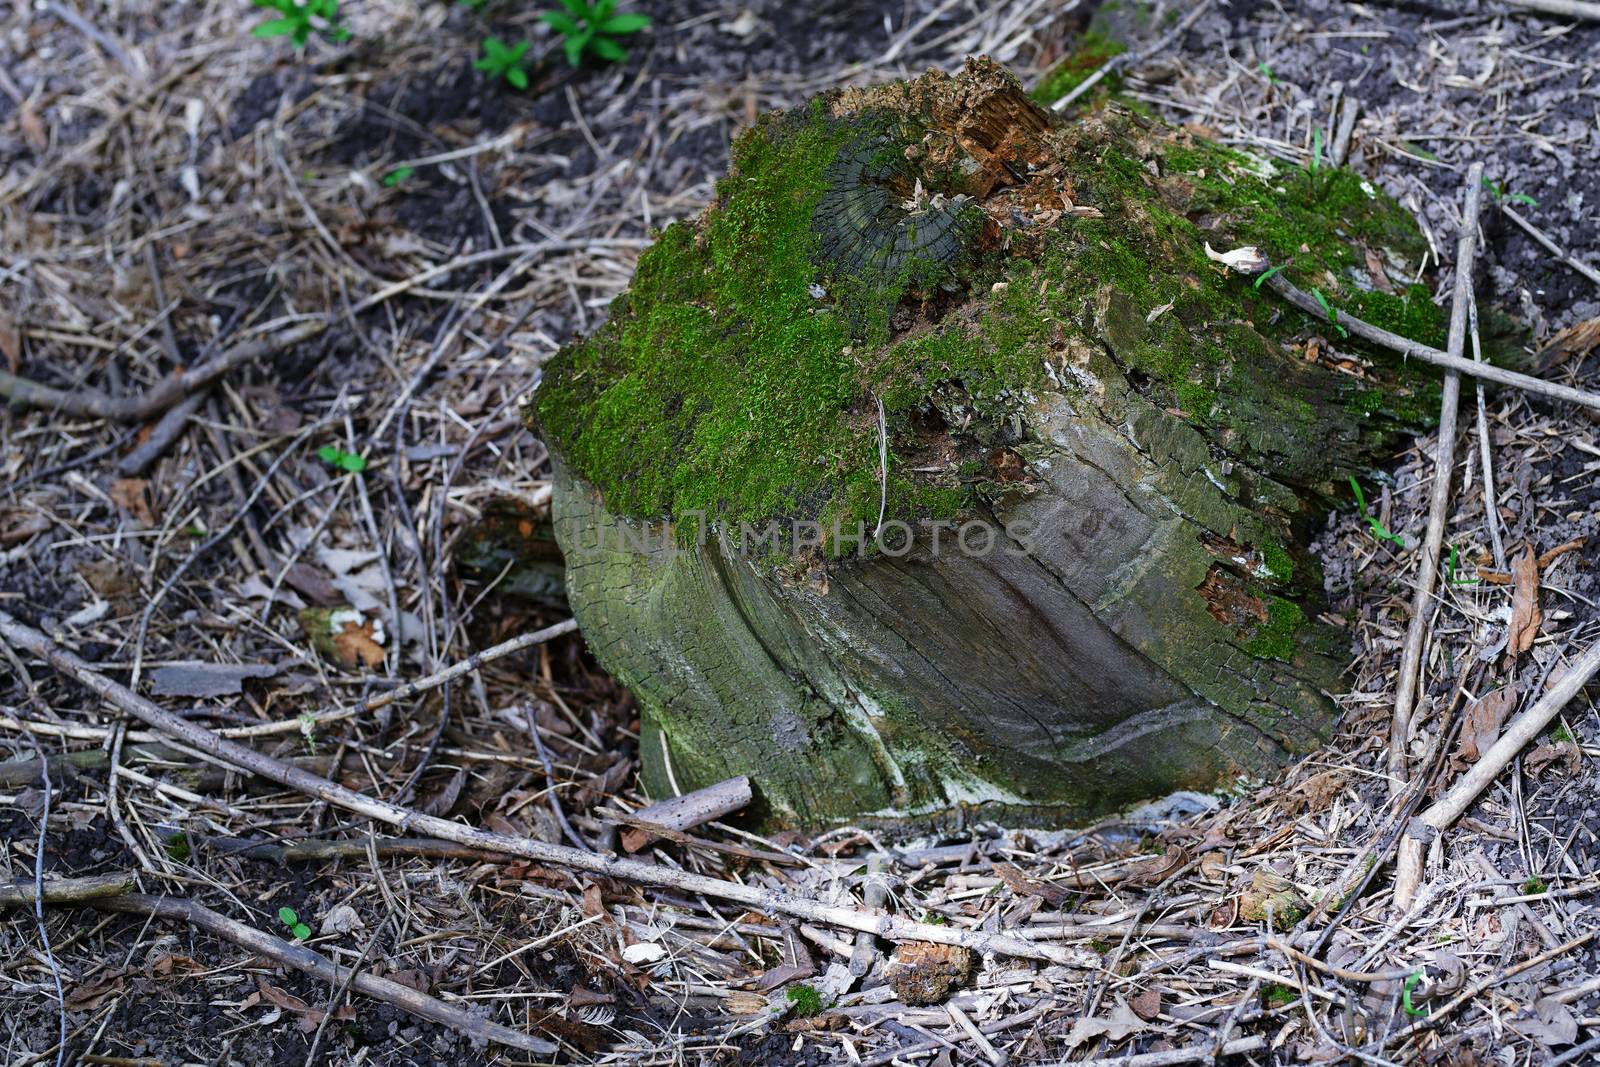 Close-up view on the tree stump with green moss